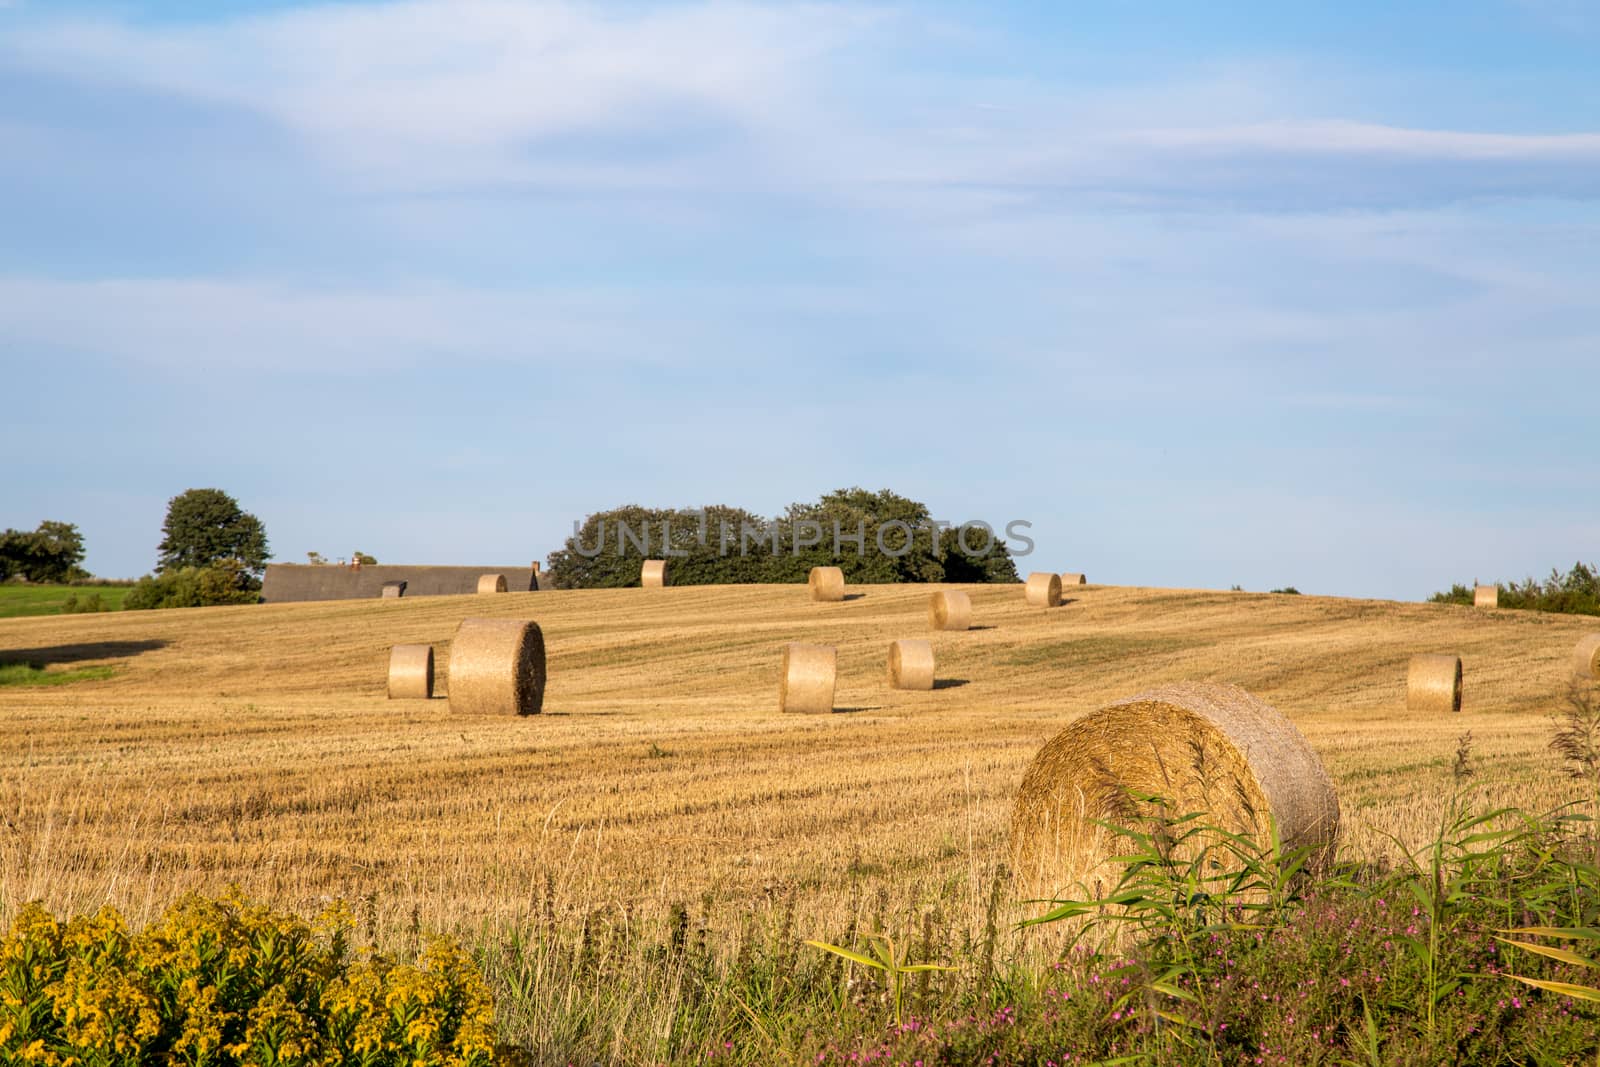 Hay bales after harvest on a field on the countryside in Northern Zealand, Denmark